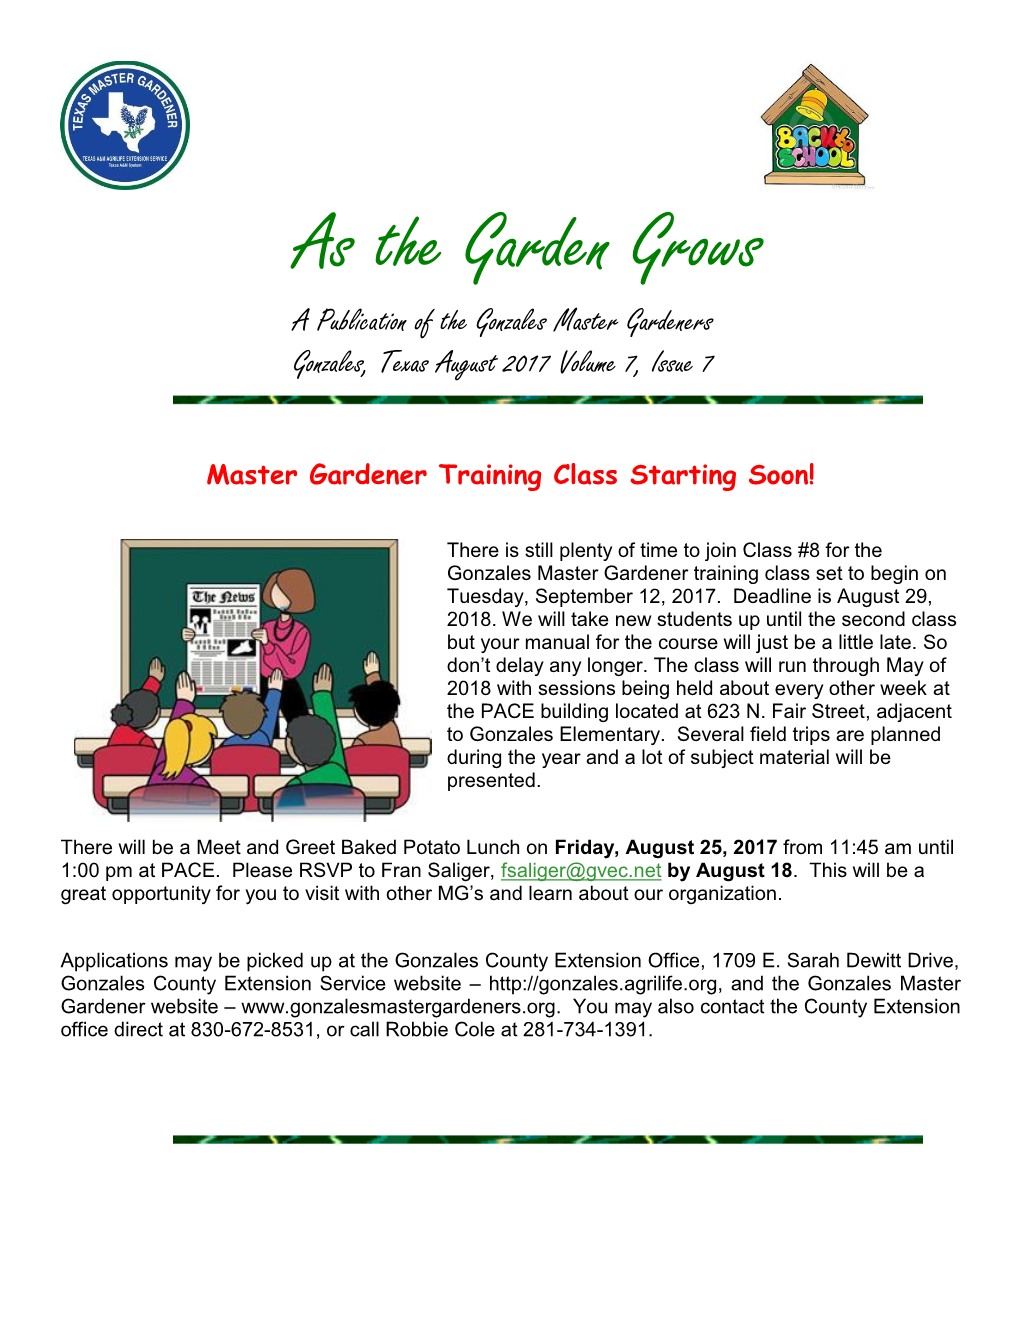 As the Garden Grows a Publication of the Gonzales Master Gardeners Gonzales, Texas August 2017 Volume 7, Issue 7